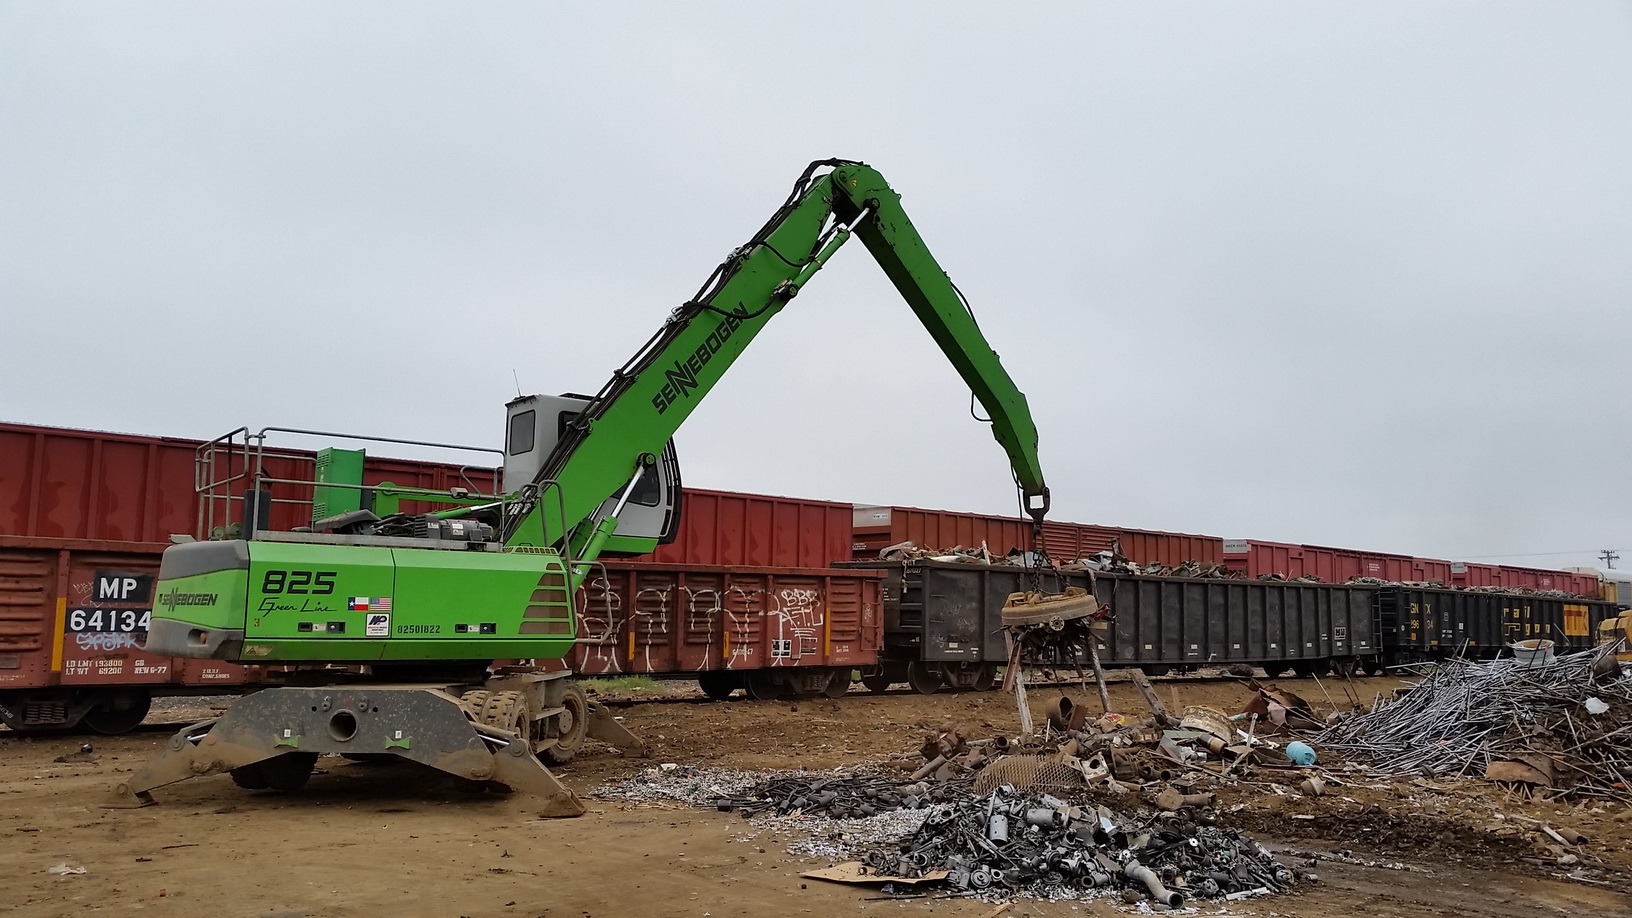 825 loading railcars in Texas.